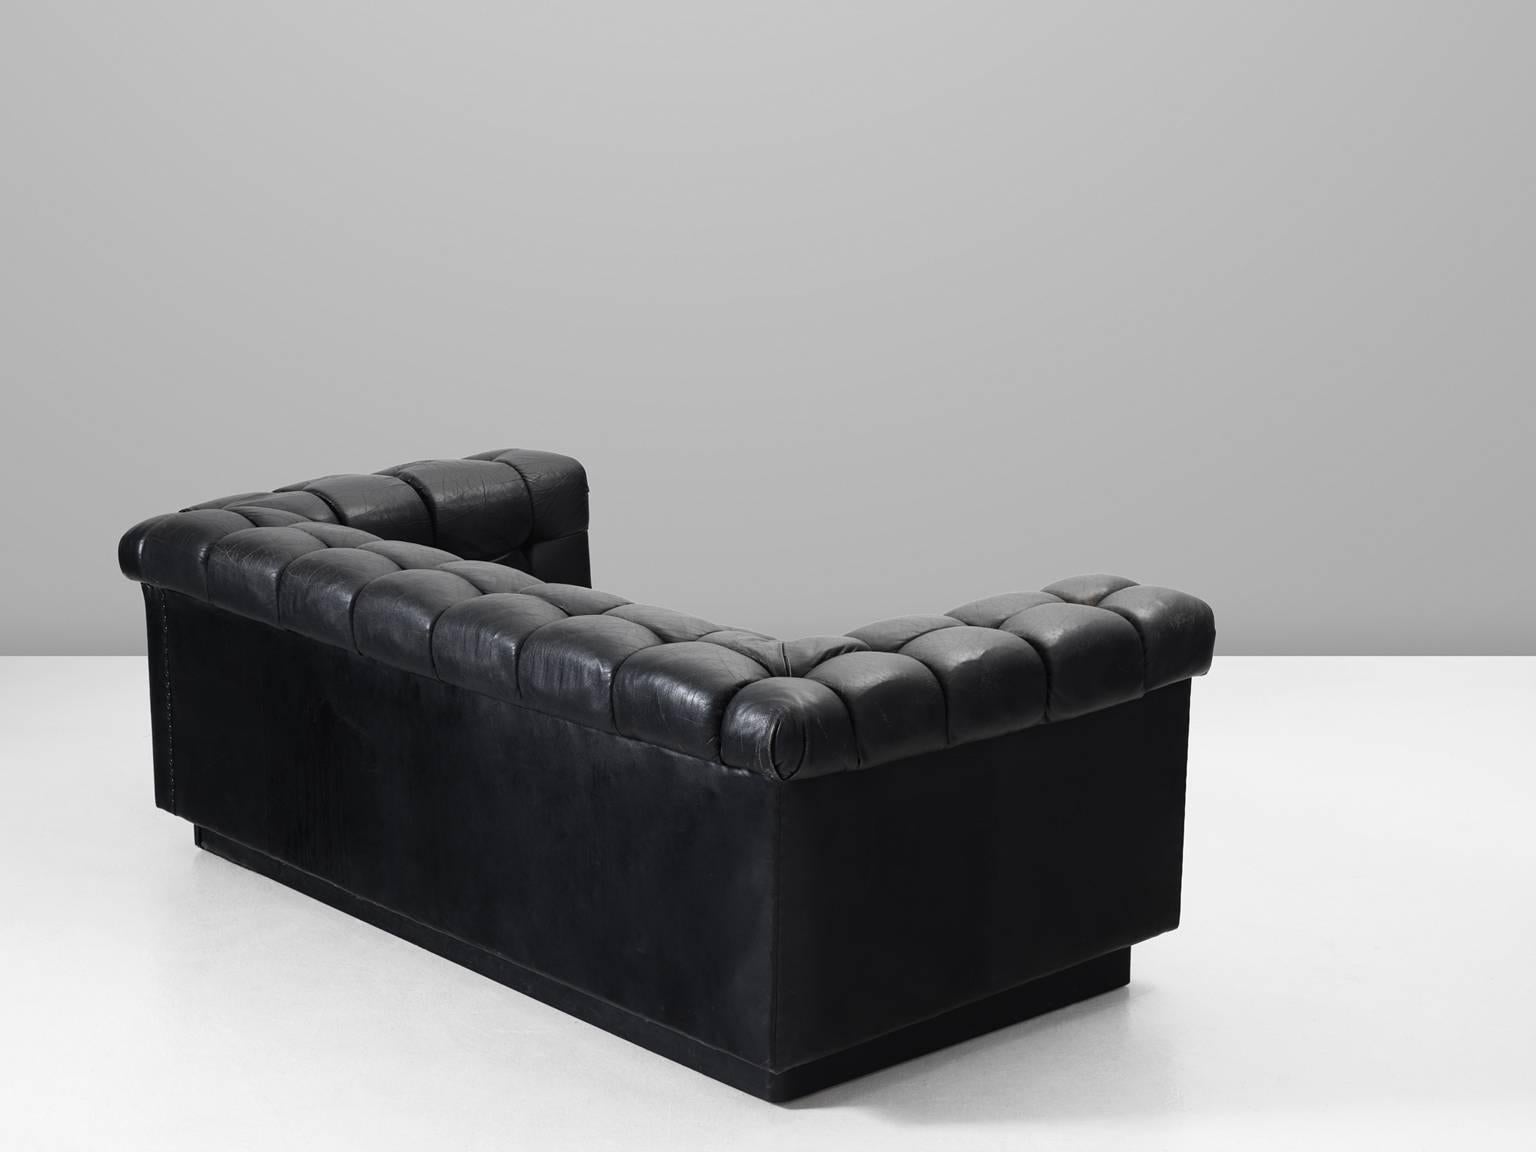 American Edward Wormley Tufted Two-Seat Sofa in Black Leather for Dunbar